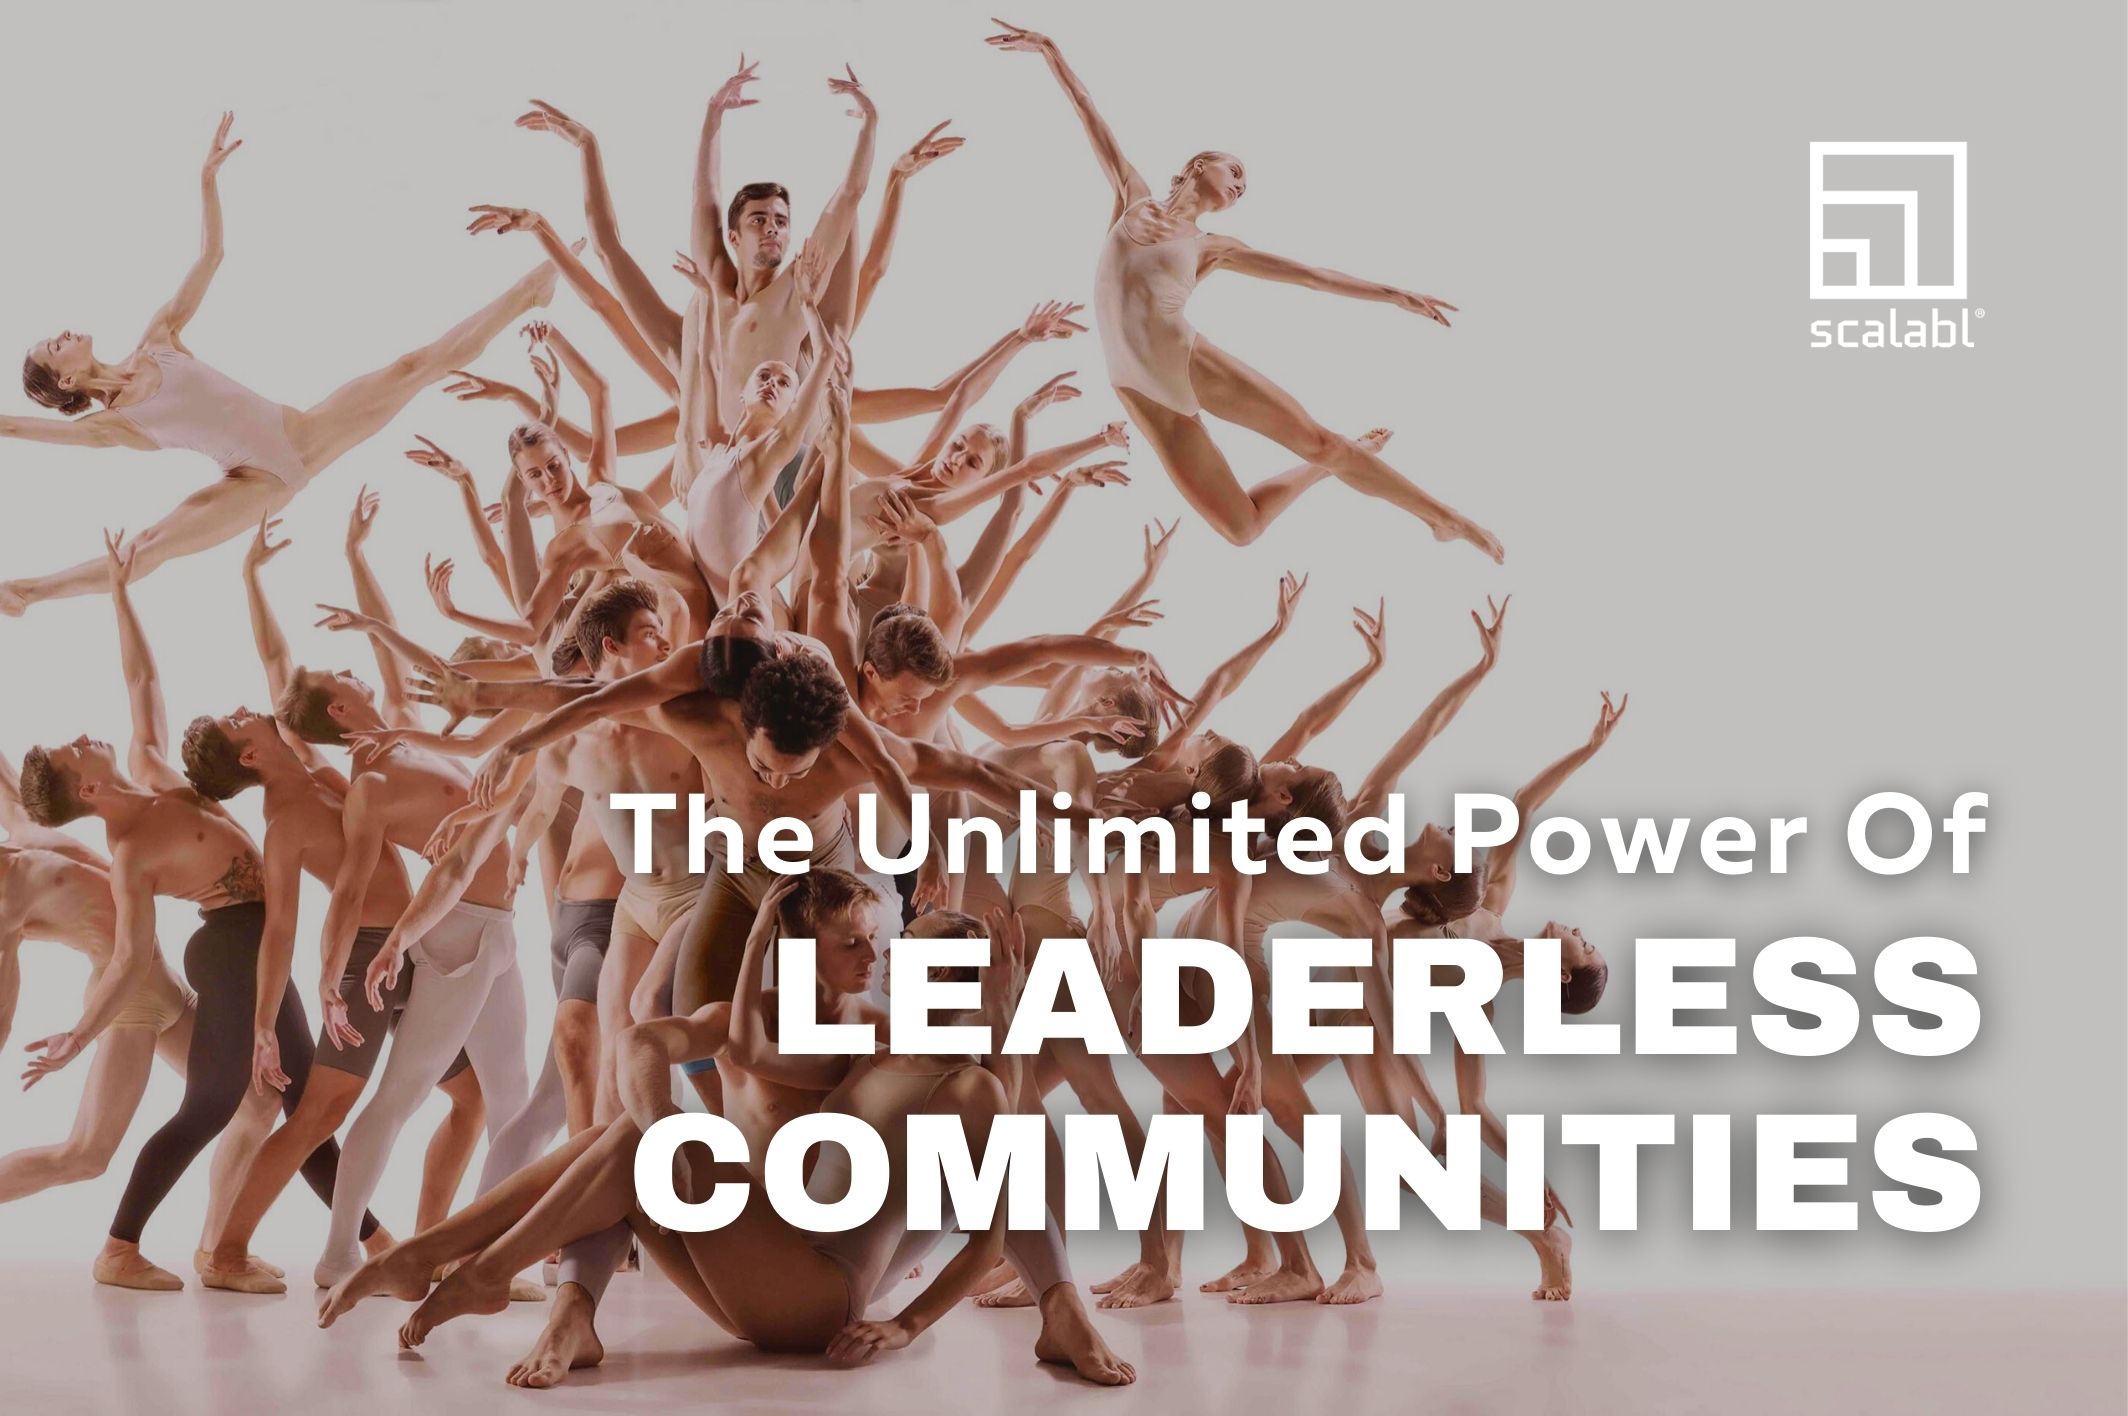 The Unlimited Power of Leaderless Communities